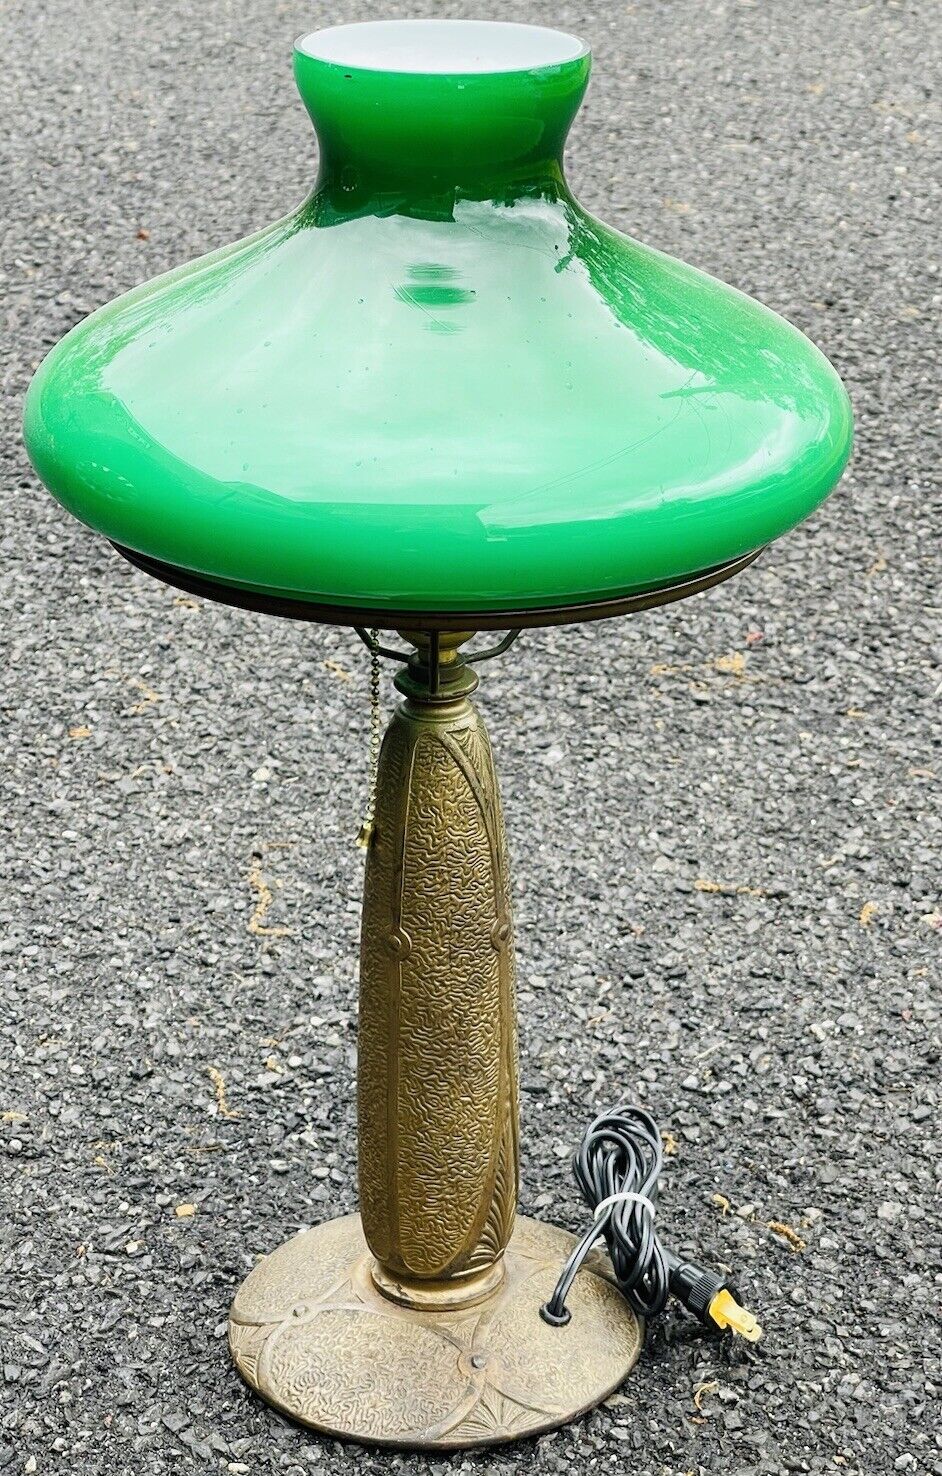 1920s American Arts & Crafts Gilt Metal Lamp. Emeralite Style Green Glass Shade.